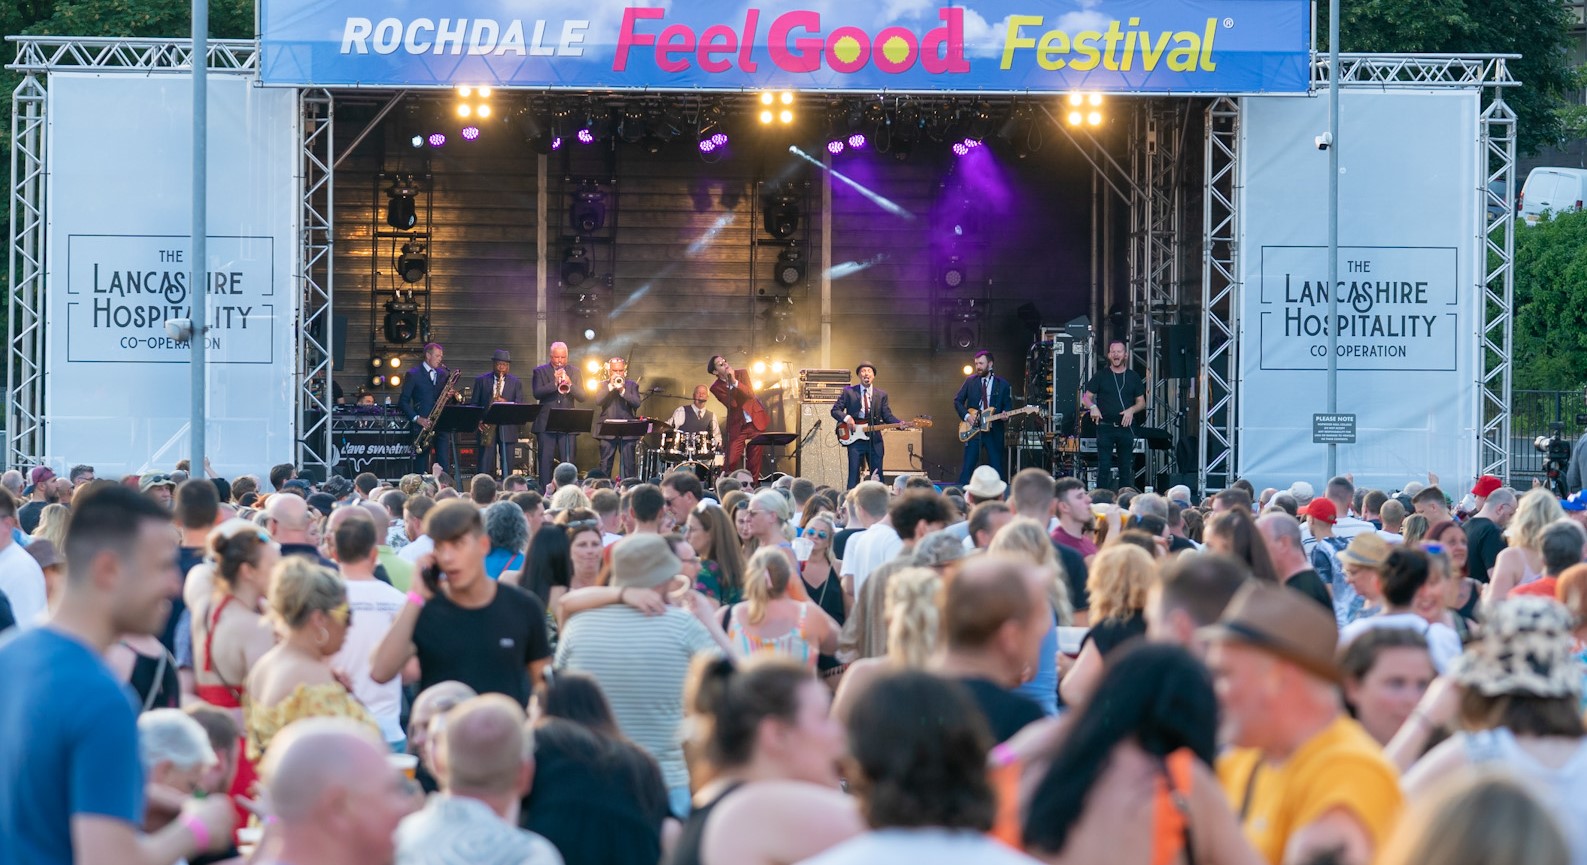 Image: Let battle commence: Chance for local act to play main stage at Rochdale Feel Good Festival